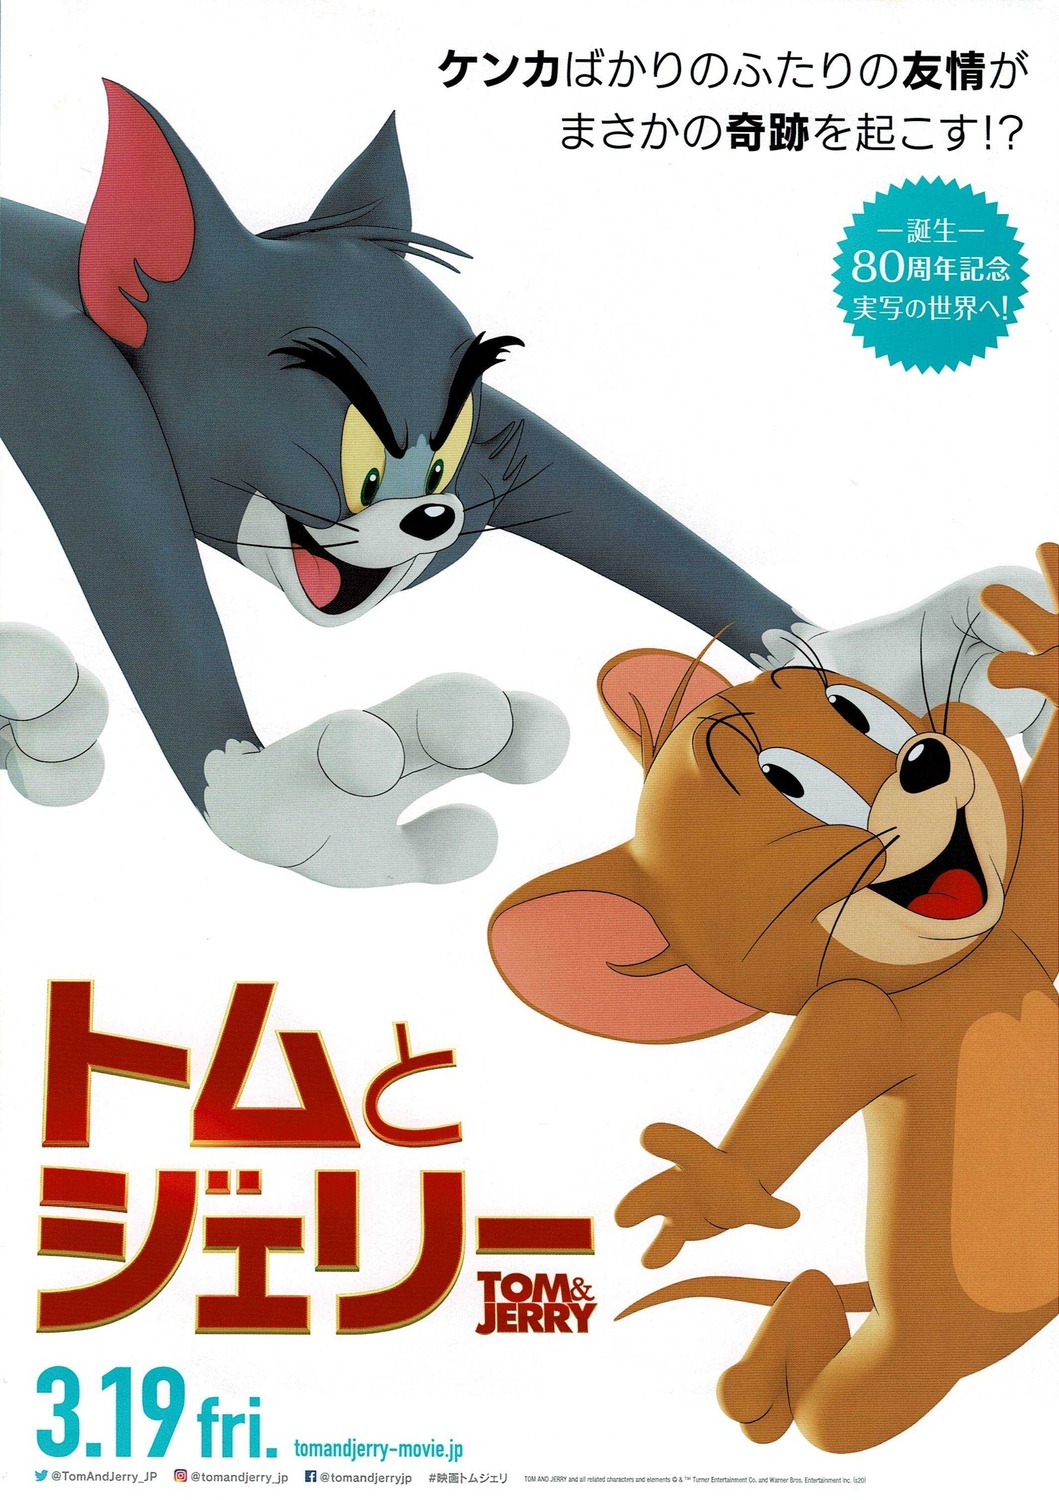 Extra Large Movie Poster Image for Tom and Jerry (#6 of 8)